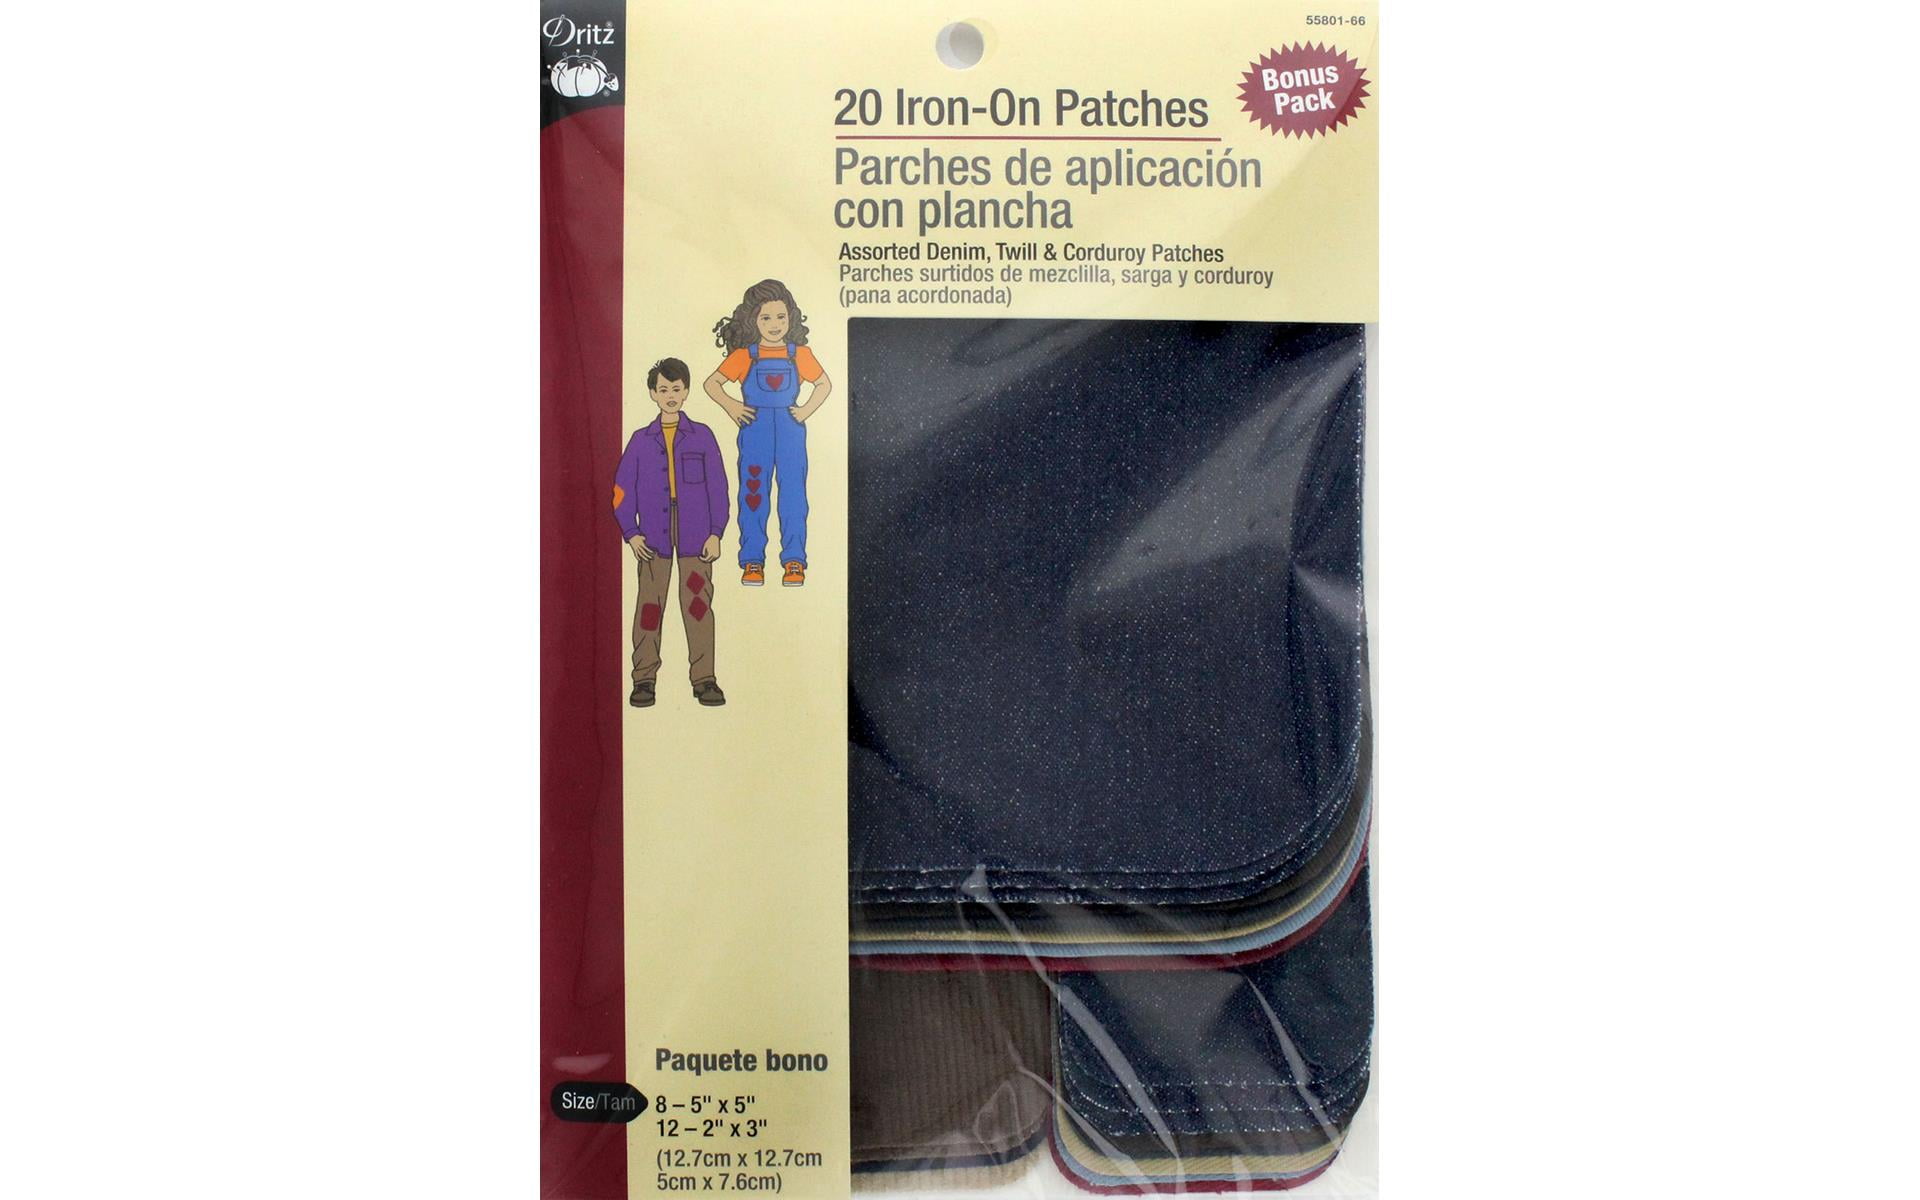 Singer Iron-On Fabric Patches in Assorted Prints, for Clothing Repairs, DIY, Craft Projects, 36 Count, Size: Large